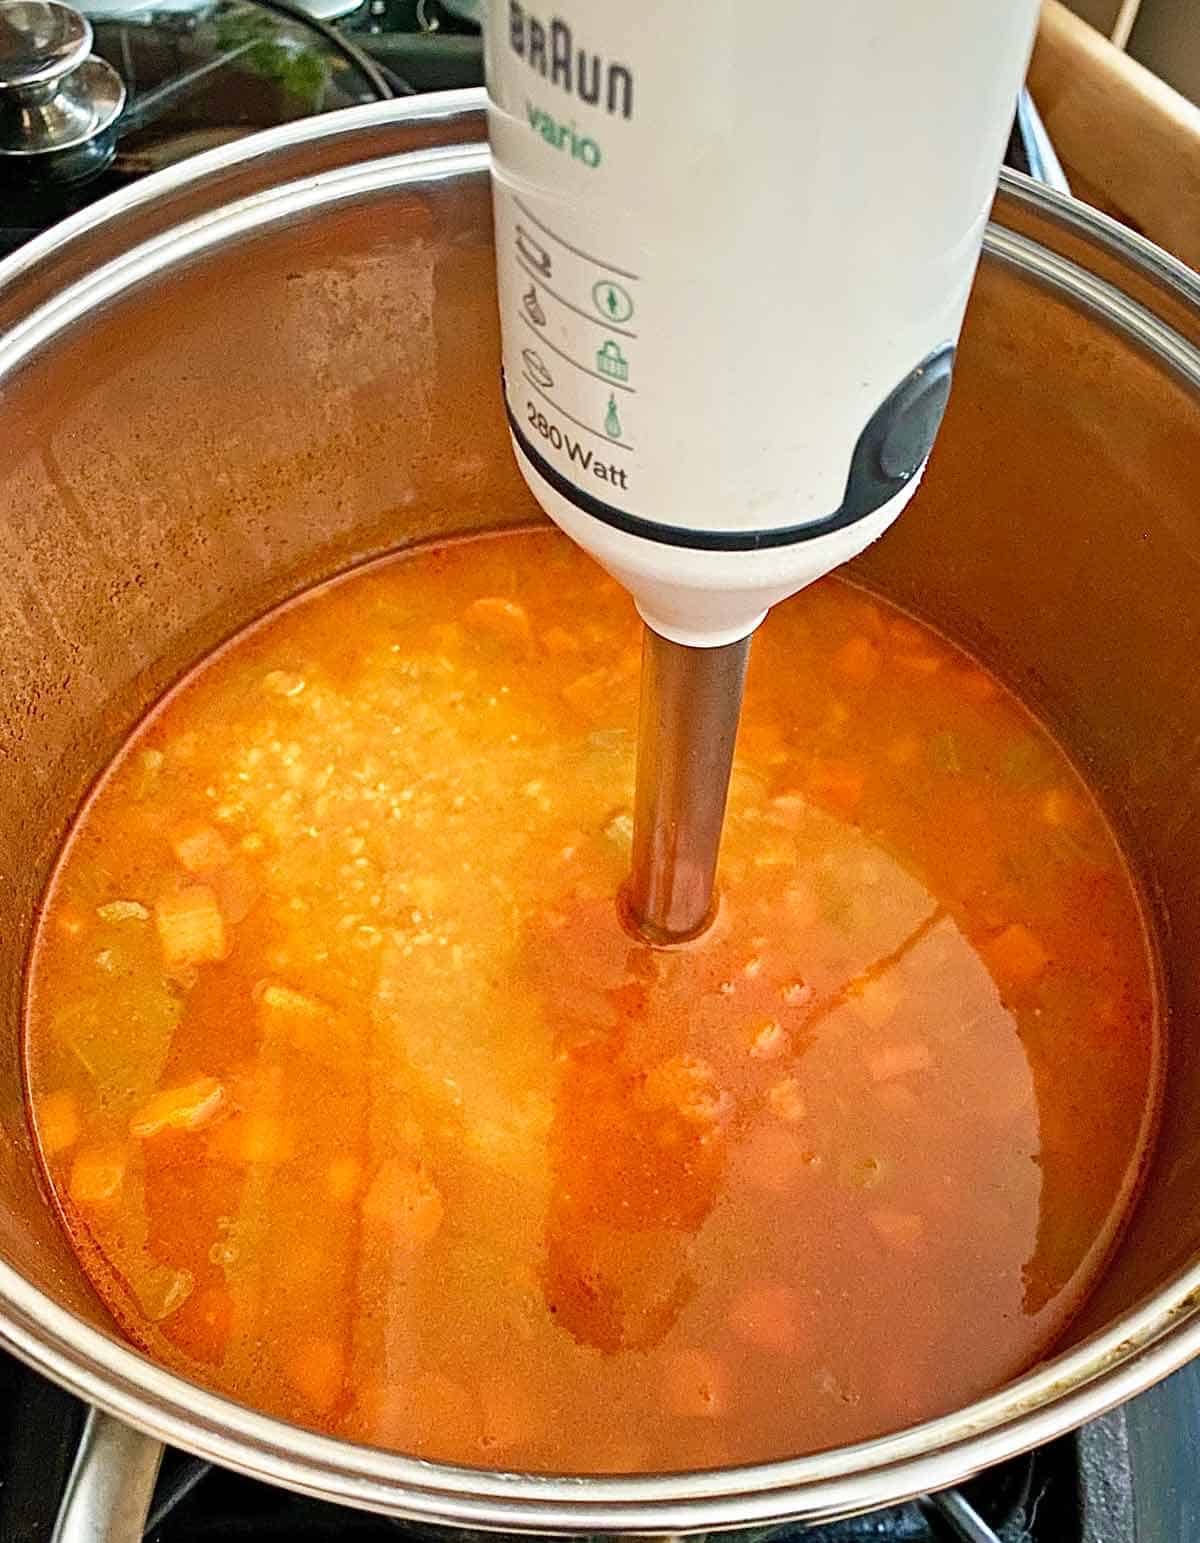 Blending some of the soup mixture with an immersion blender in a stock pot.